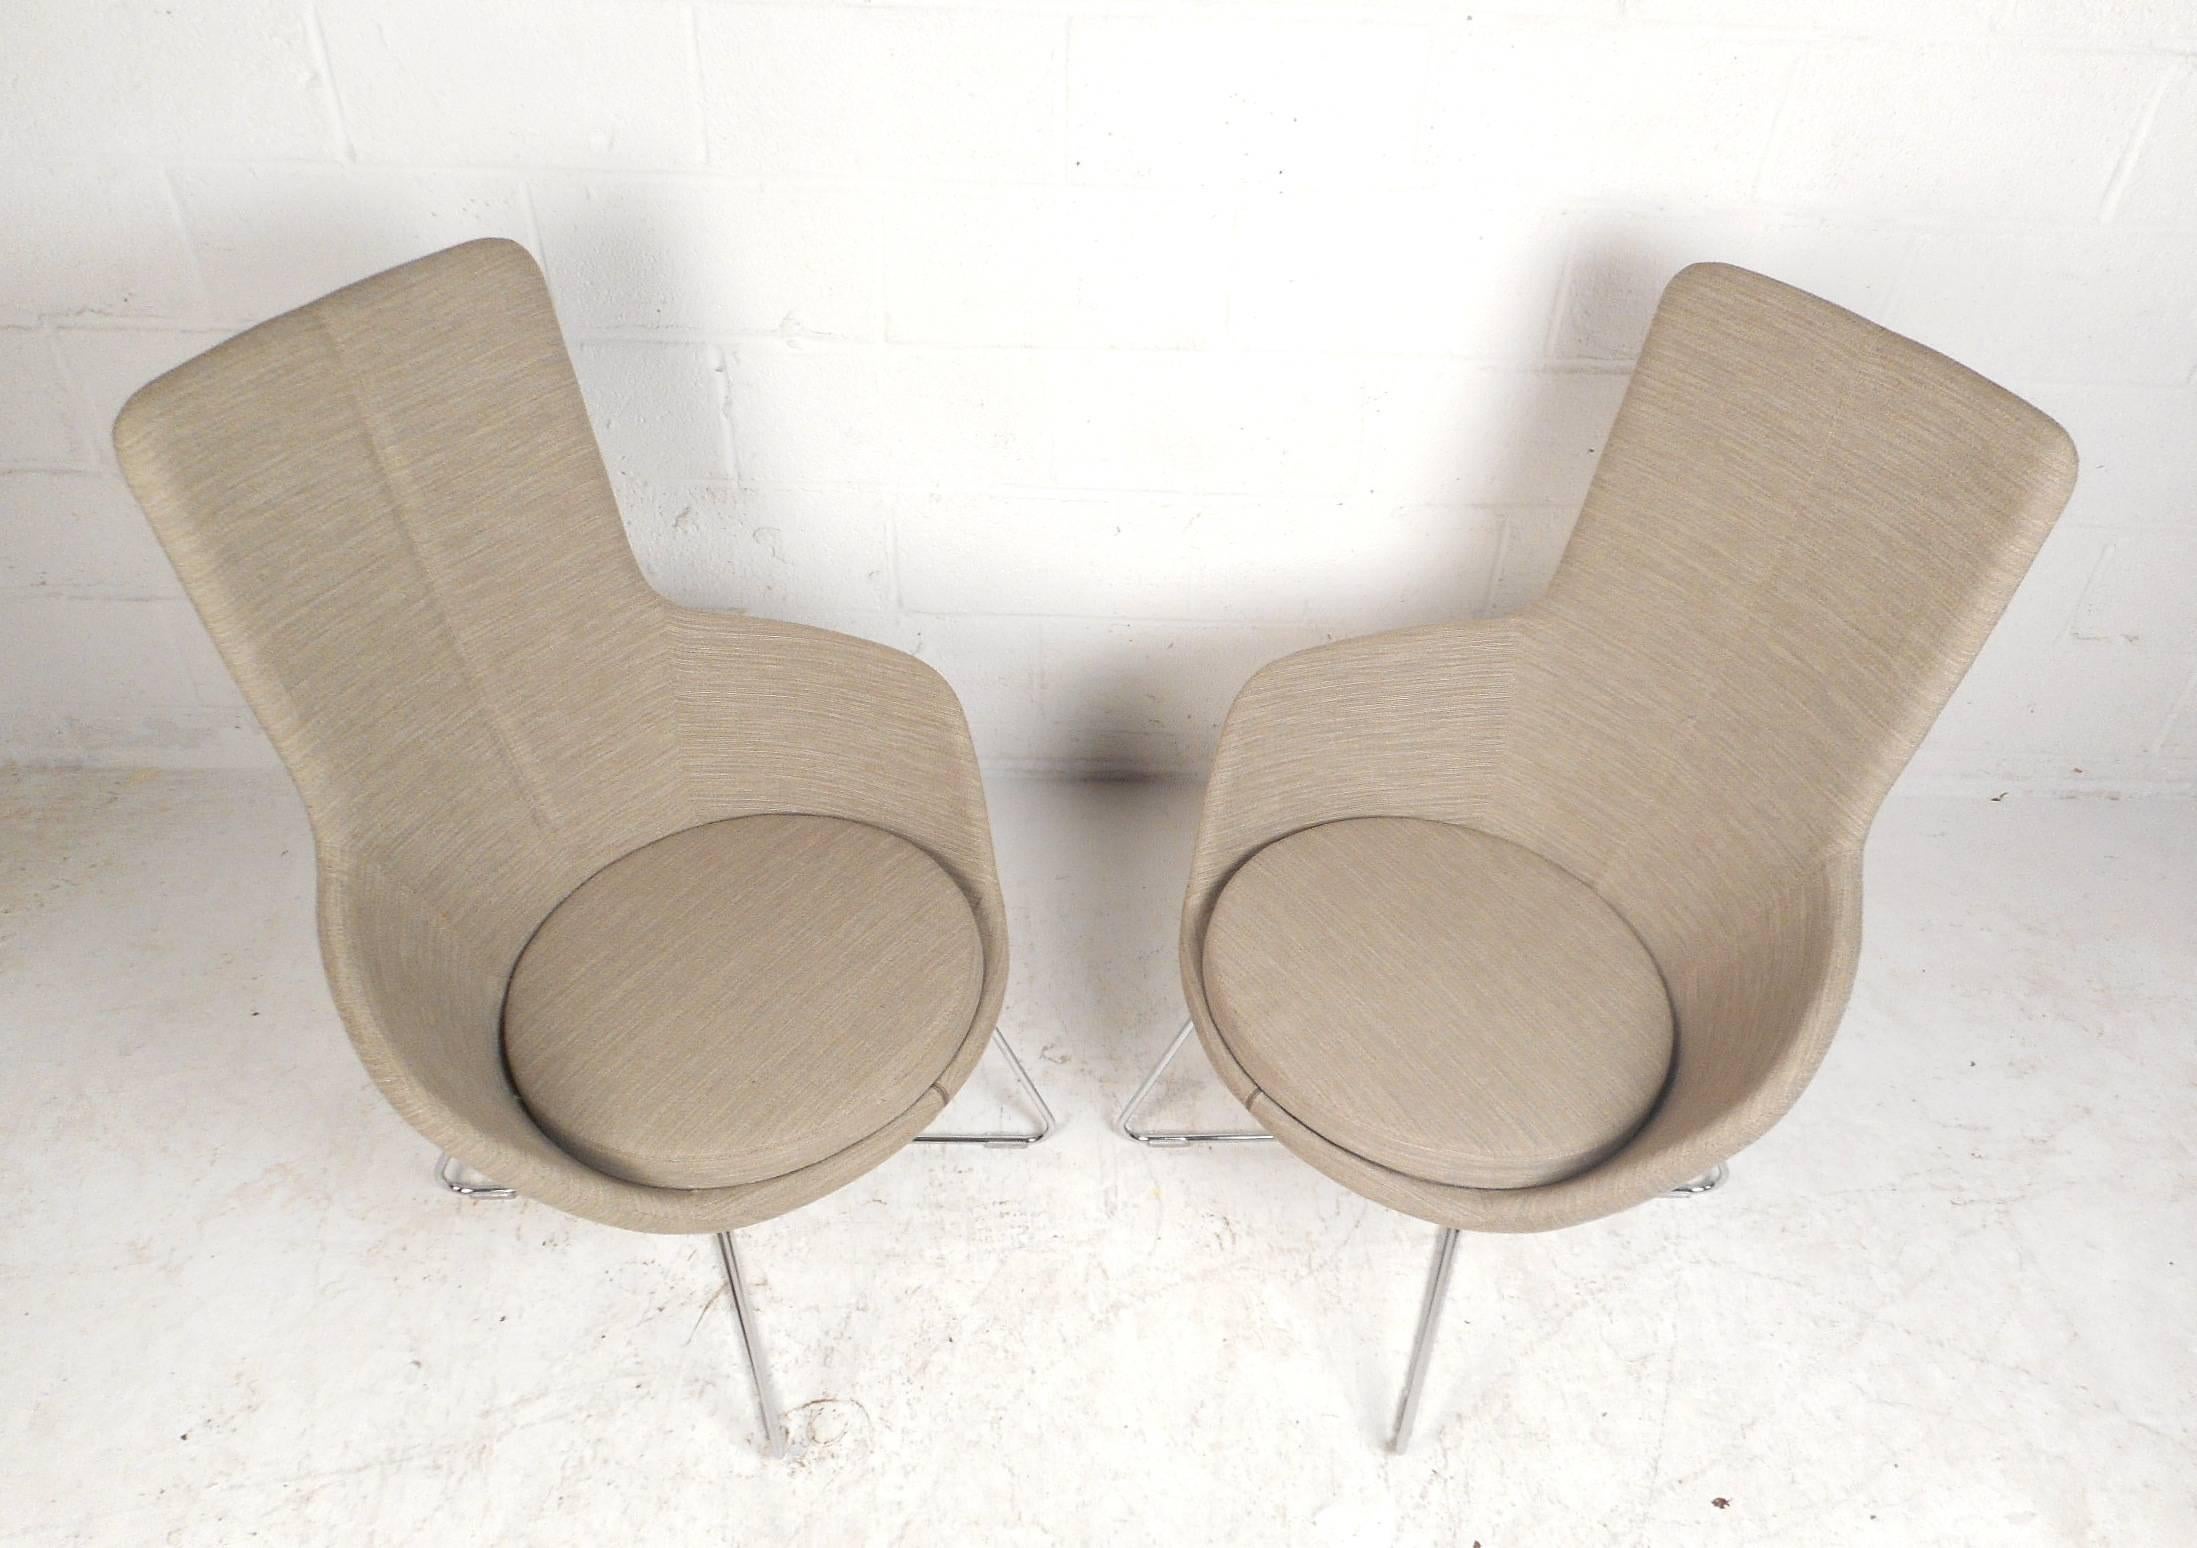 This gorgeous pair of contemporary modern lounge chairs feature unique metal rod bases with hairpin style feet. Unique design with bucket seats, a sculpted high backrest, and a thick padded cushion to sit on. This comfortable pair is covered in